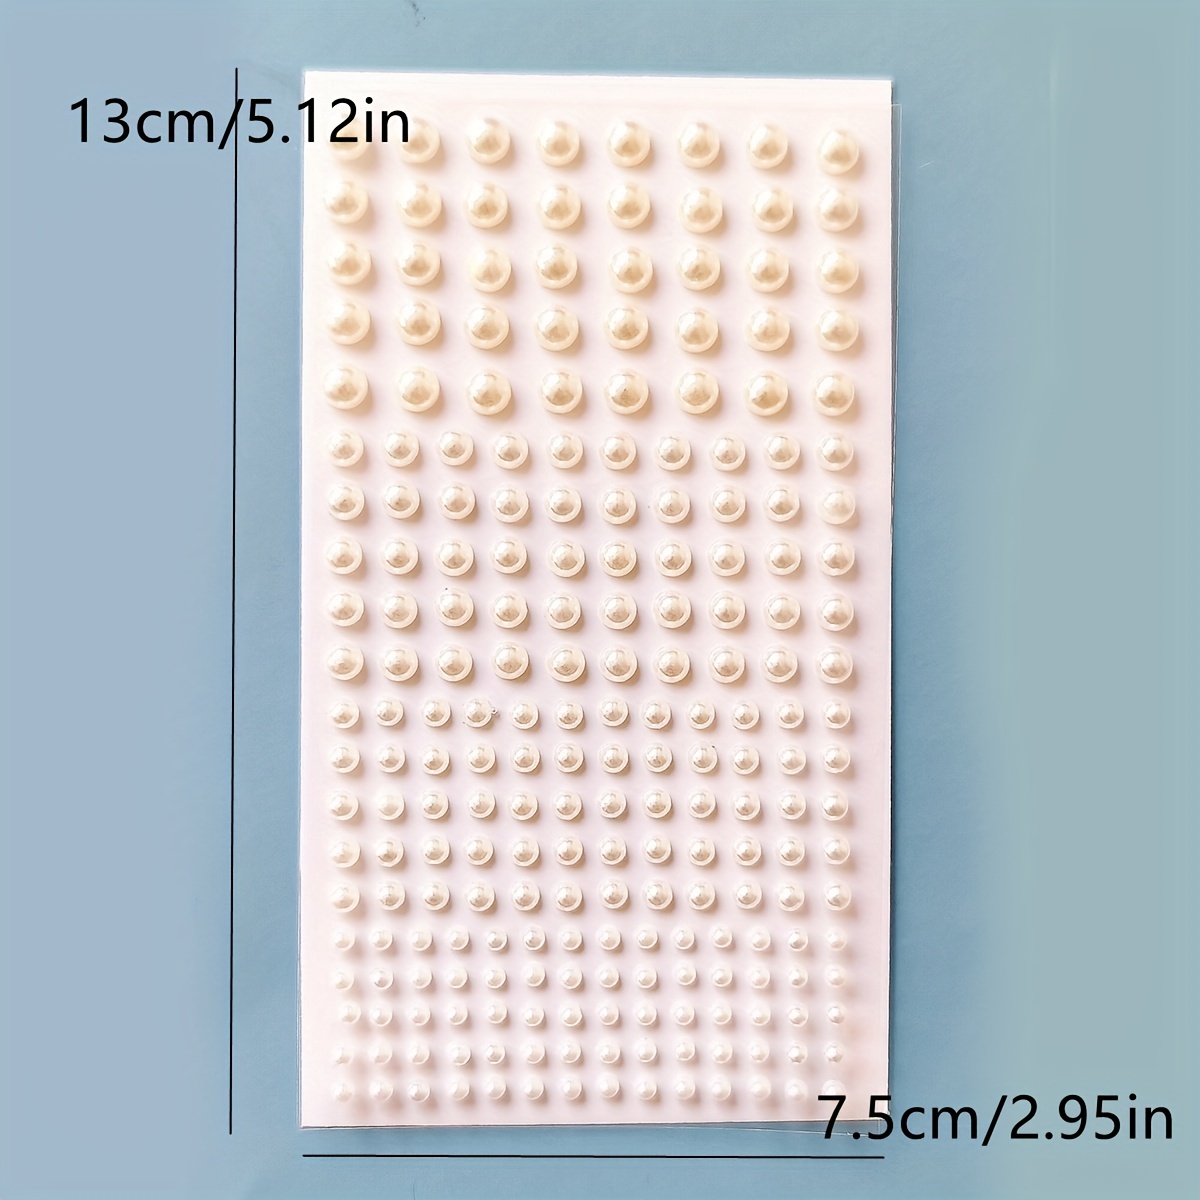  2744 Pcs Hair Pearls Stick On, Self Adhesive Pearl Stickers,  Pearl Stickers for Crafts, Stick On Pearls, Hair Face Gems, Face Pearls,  Beige Pearl Stickers for Makeup Nail DIY Crafts,Assorted Size